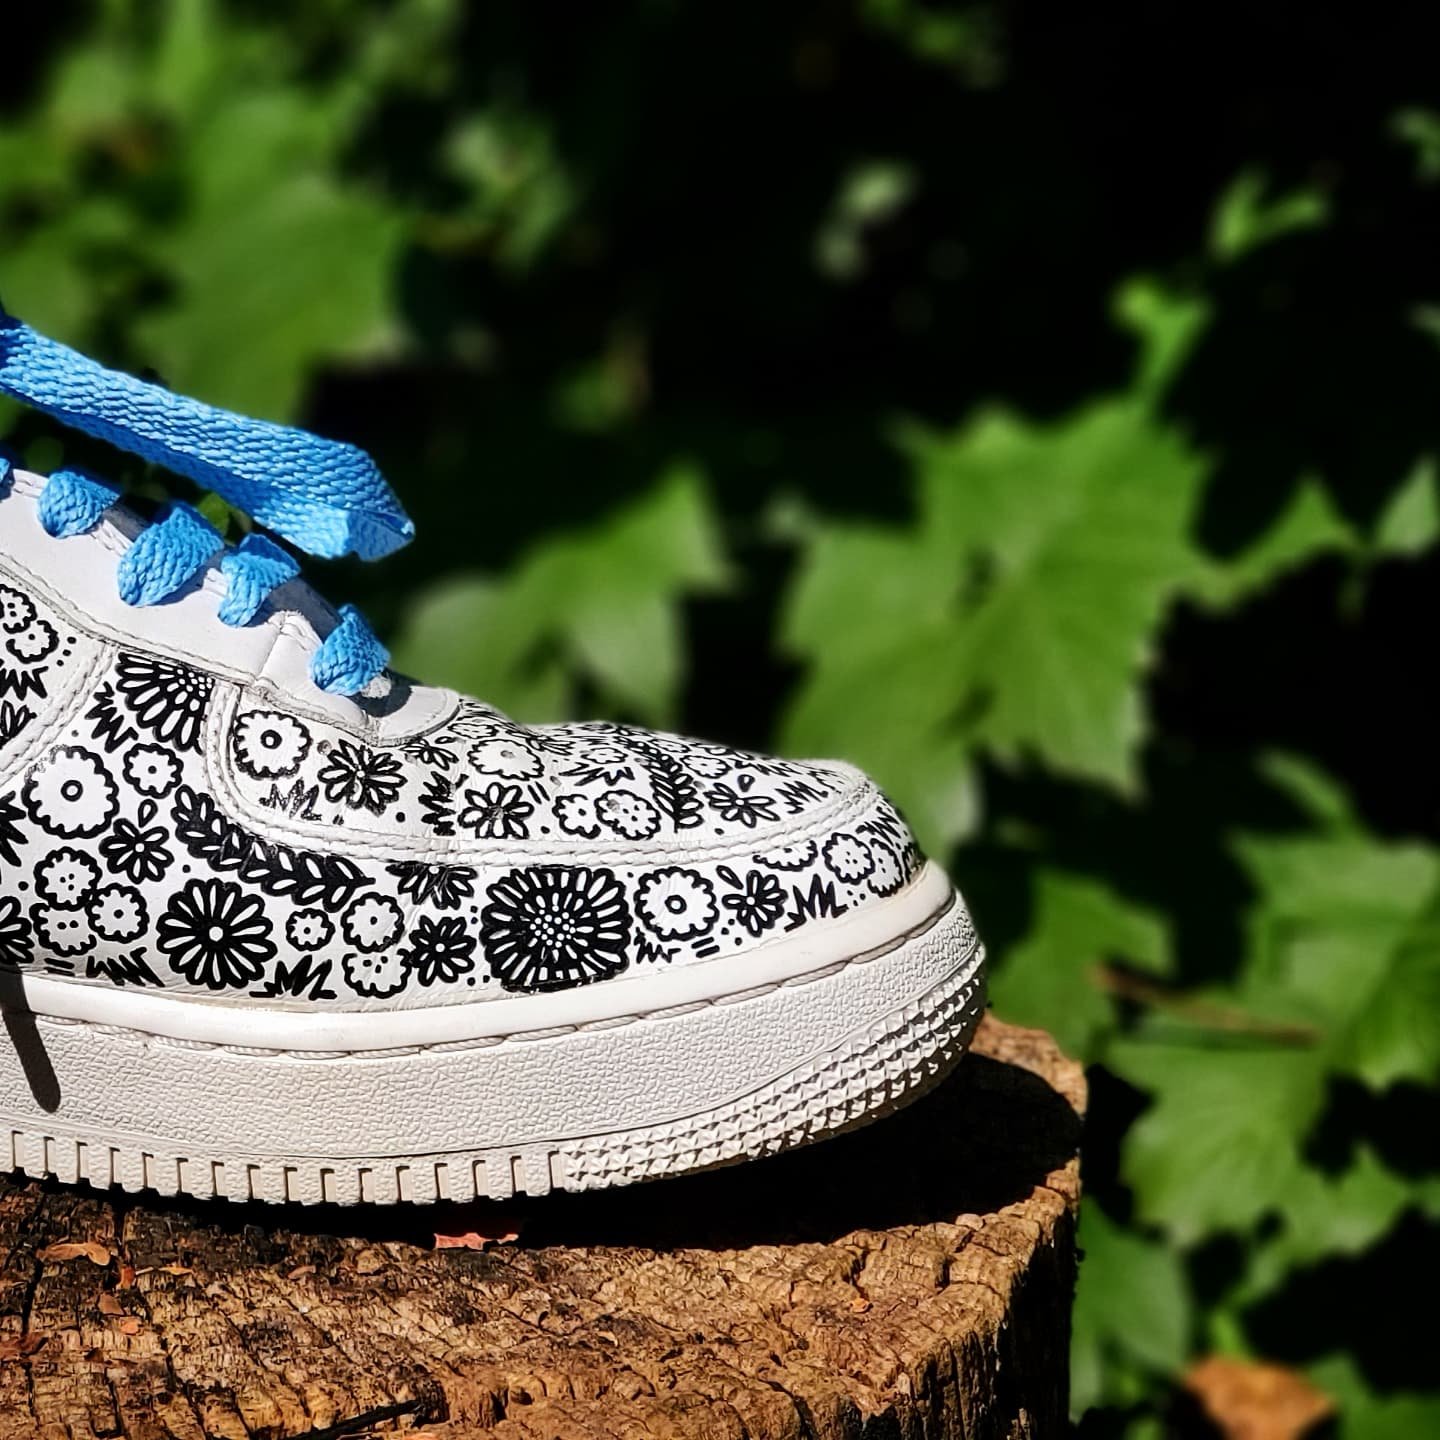  pattern: garden party   shoes: nike af-1    laces:  colored flat, carolina blue  aglets: neochrome 